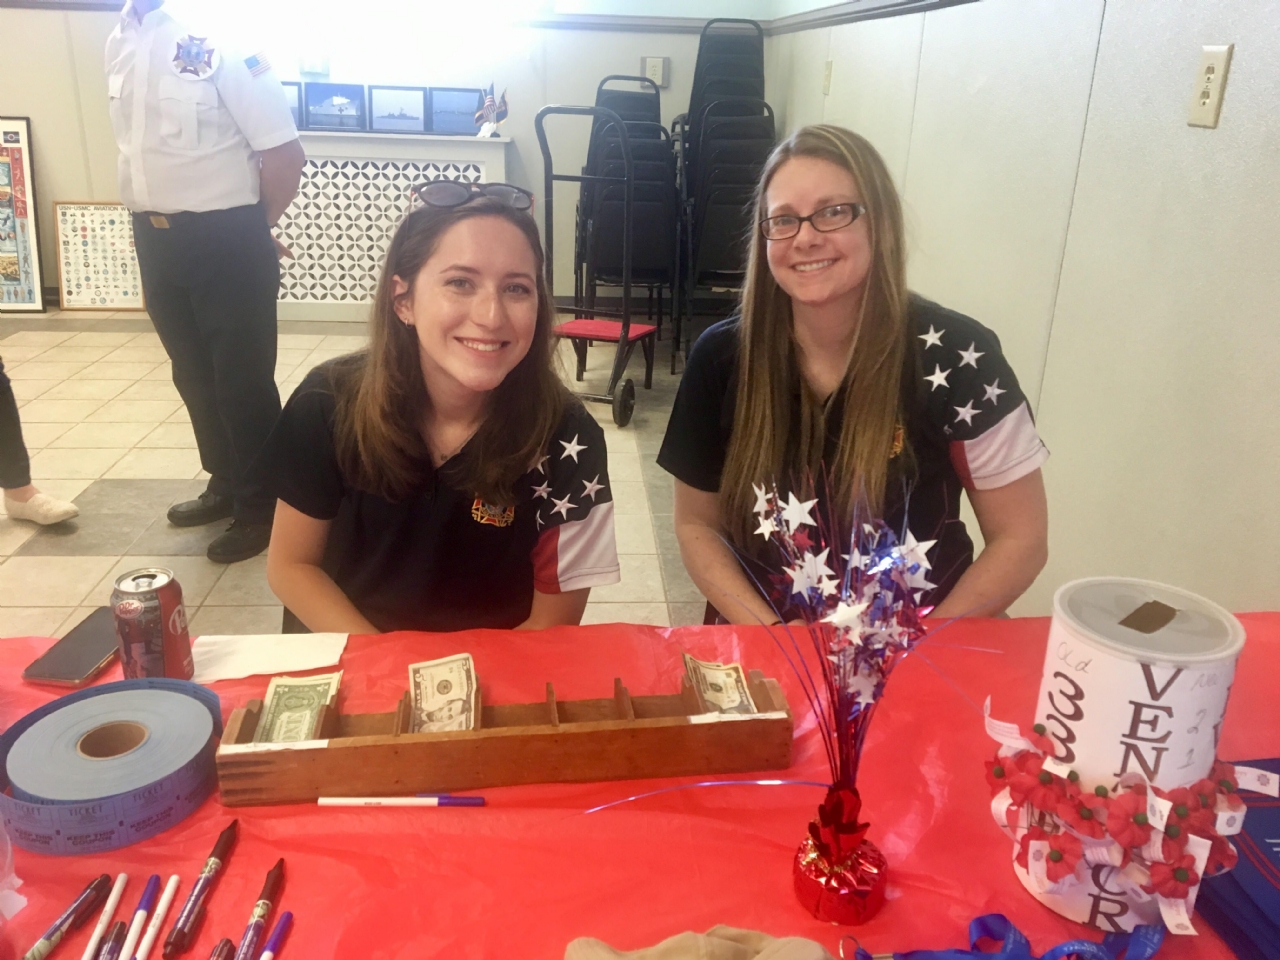 VFW Auxiliary Life Members Jennifer Wagener (R) and Rachel Shulte-Doody distribute Buddy Poppies and handle donations from a larger than usual attendance.